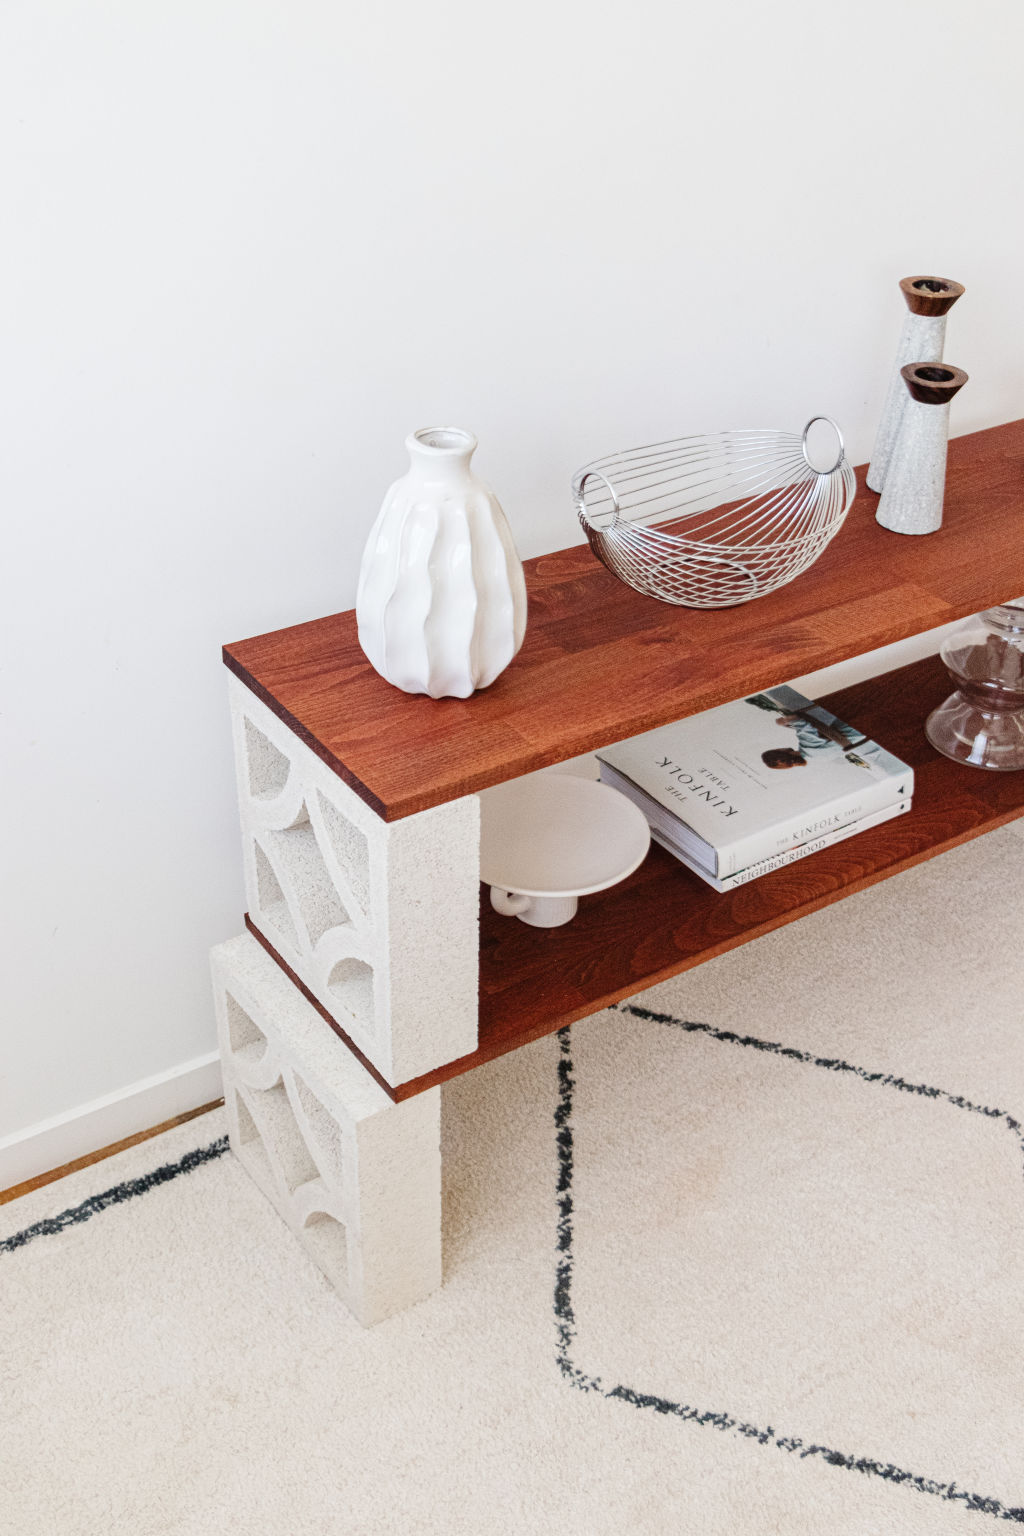 Jaharn Quinn's  DIY breeze-block shelves took 20 minutes to make and wouldn’t look out of place in a glossy interiors magazine. Photo: Dennis Minster